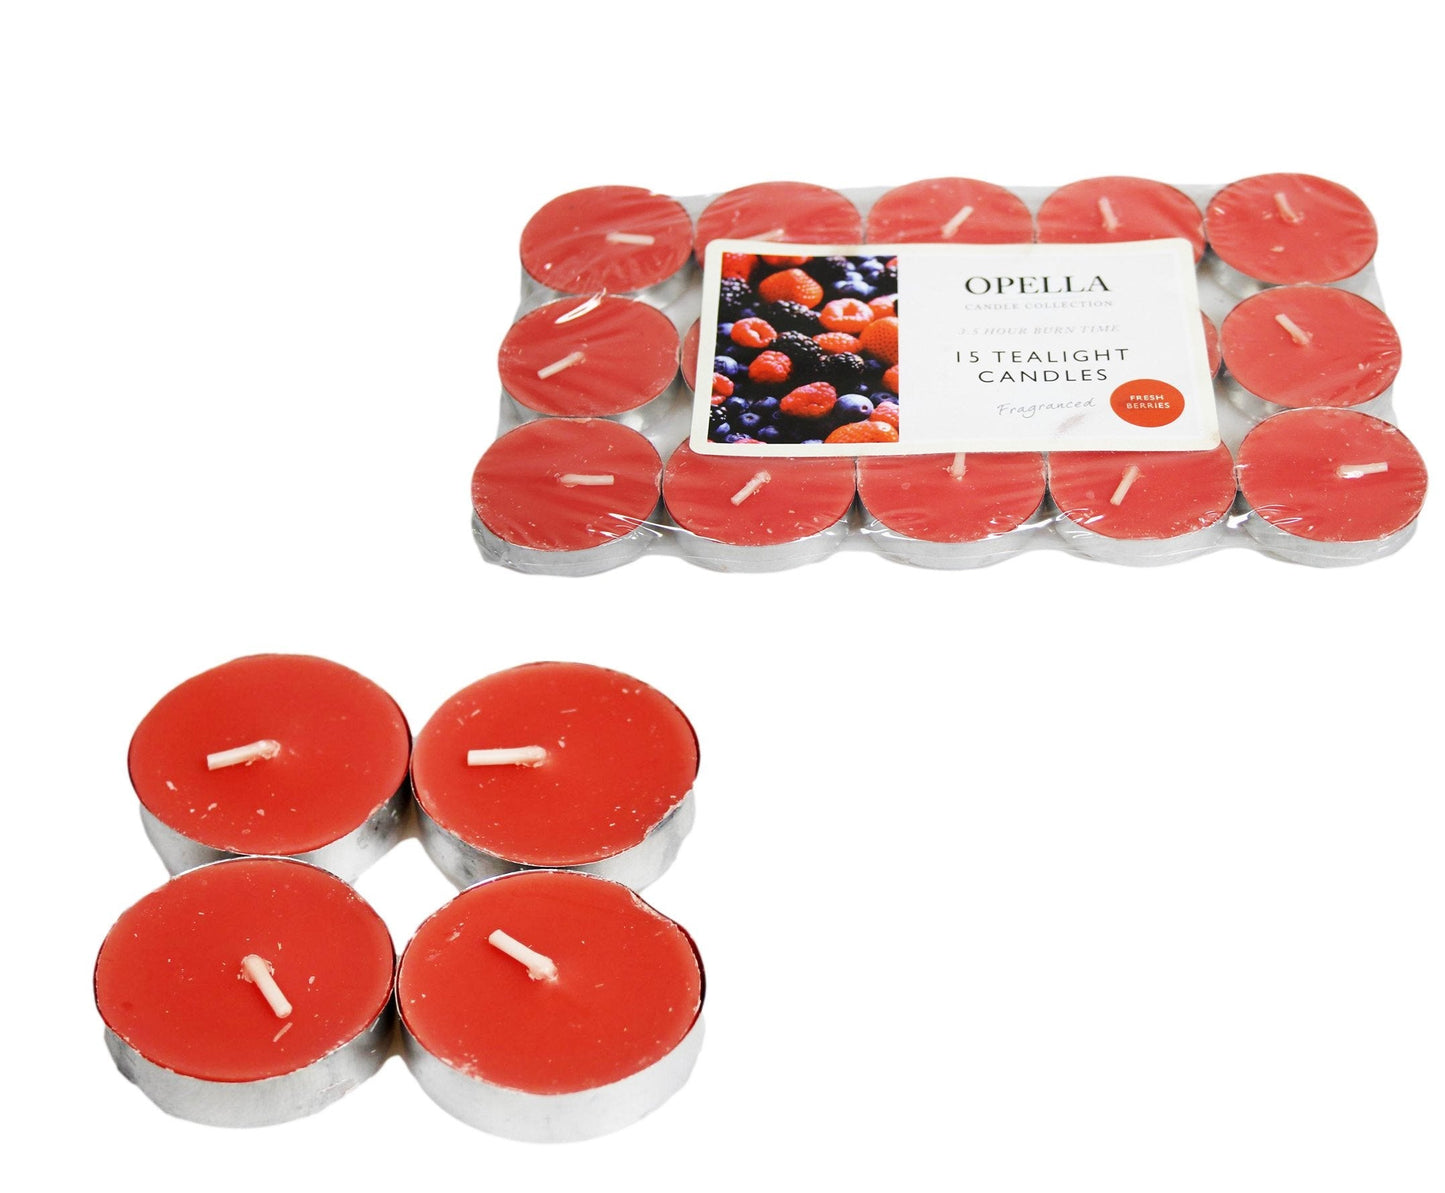 Beautifully Berries Scented Opella Fragranced 12 Tealight Candles 3.5 Hour Burn Time CD001B (Large Letter Rate)